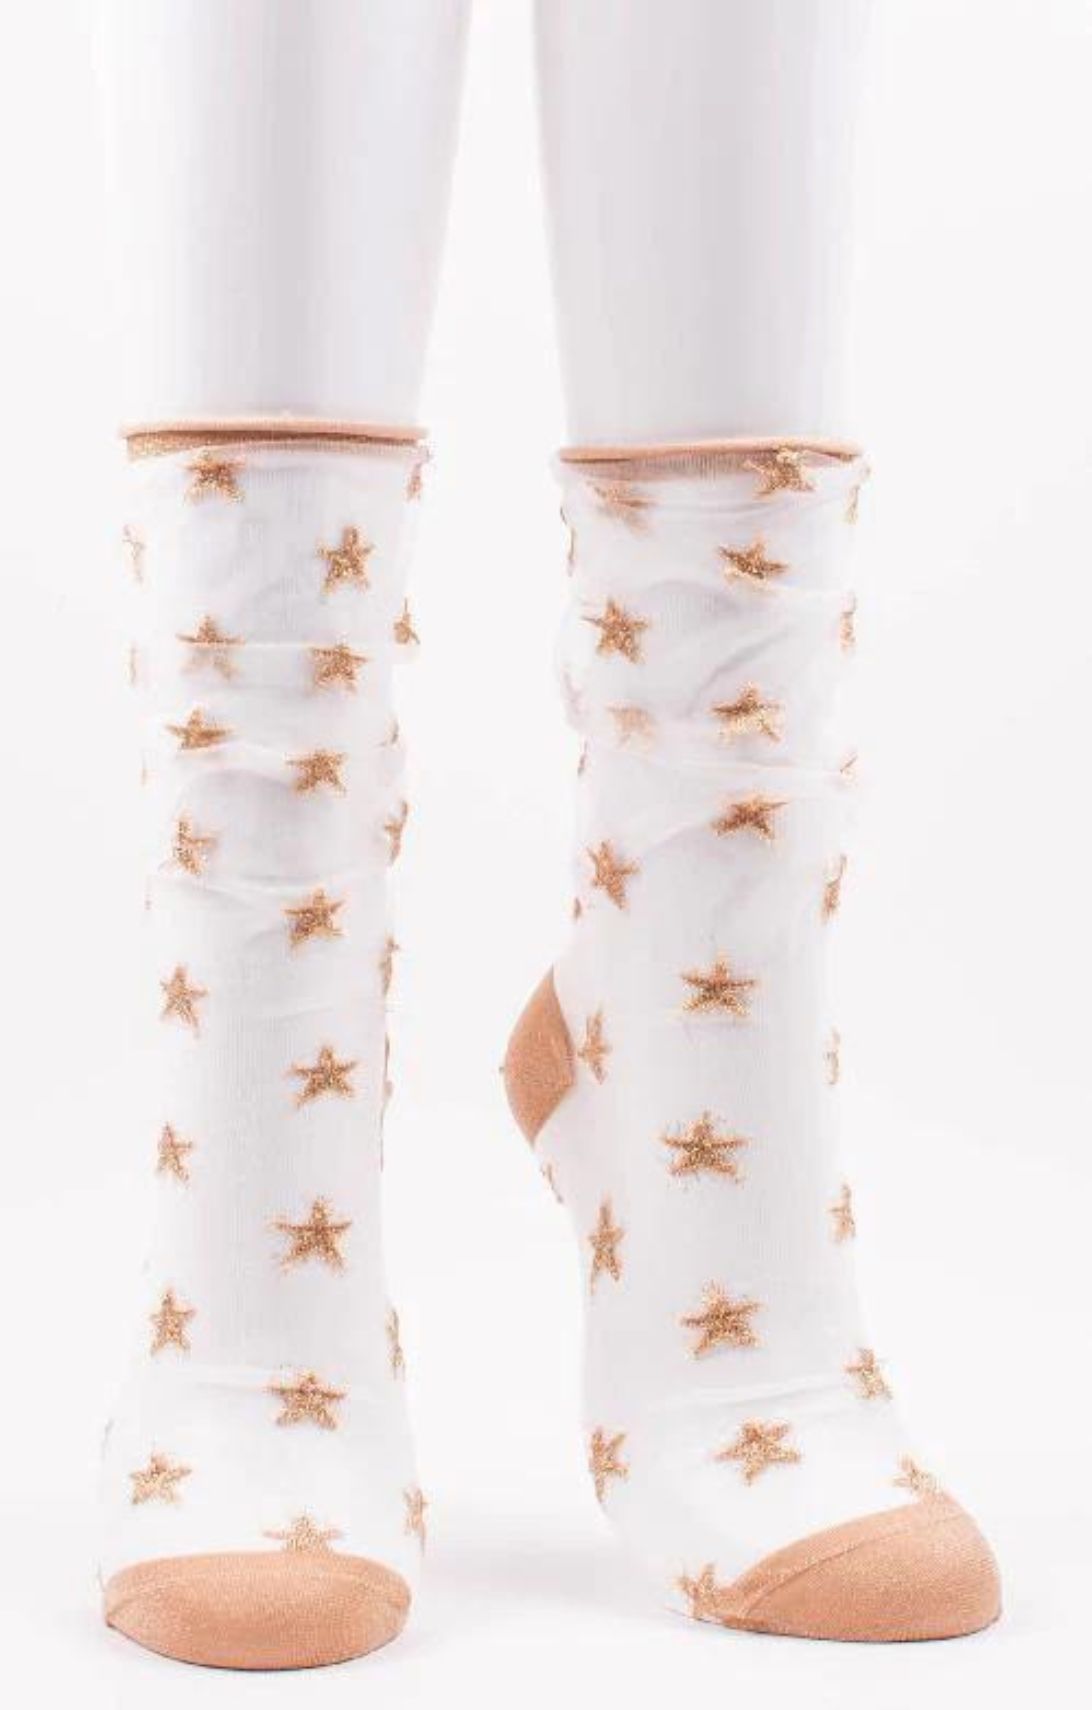 TABBISOCKS brand Clear Star Tulle Socks in SCLEAR GOLD color with gold colored stars all over the white transparent fabric